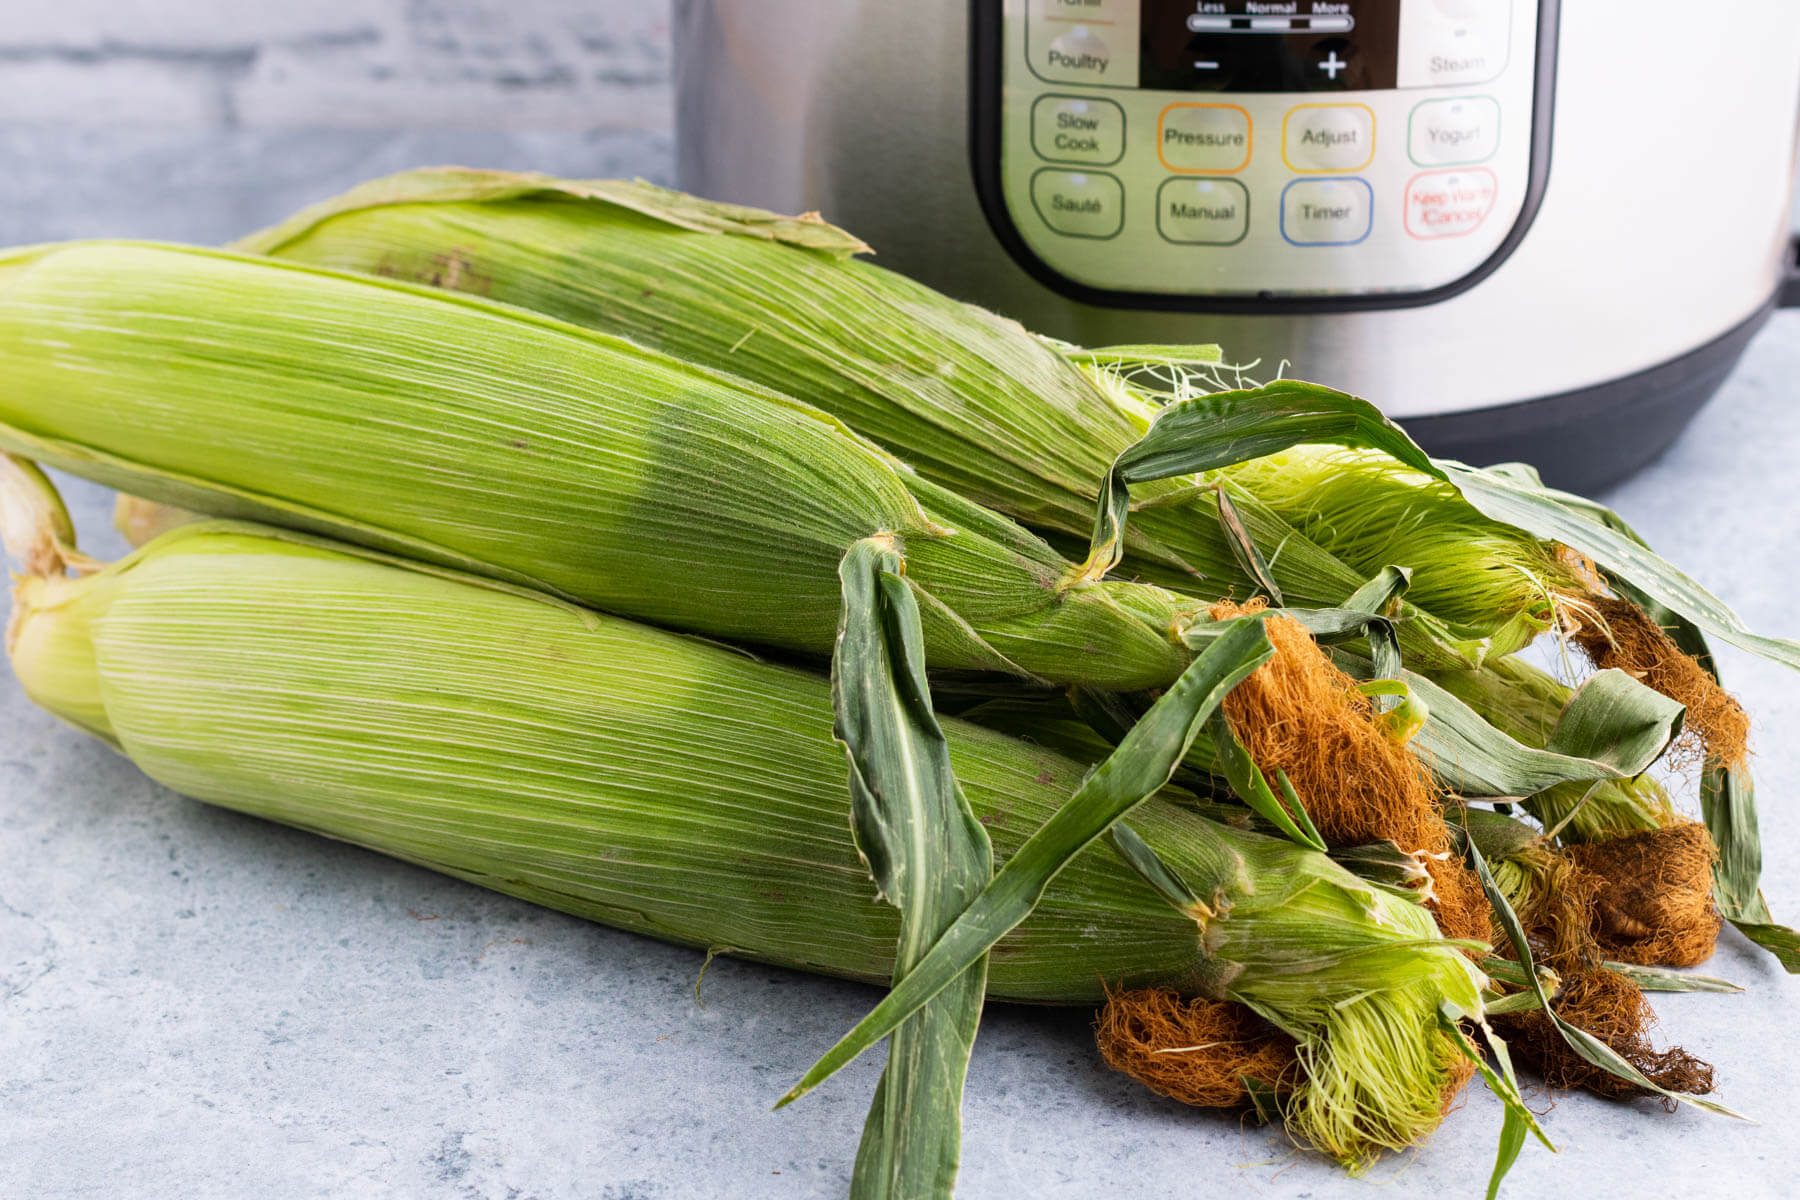 A stack of green ears of corn in front of an Instant Pot.